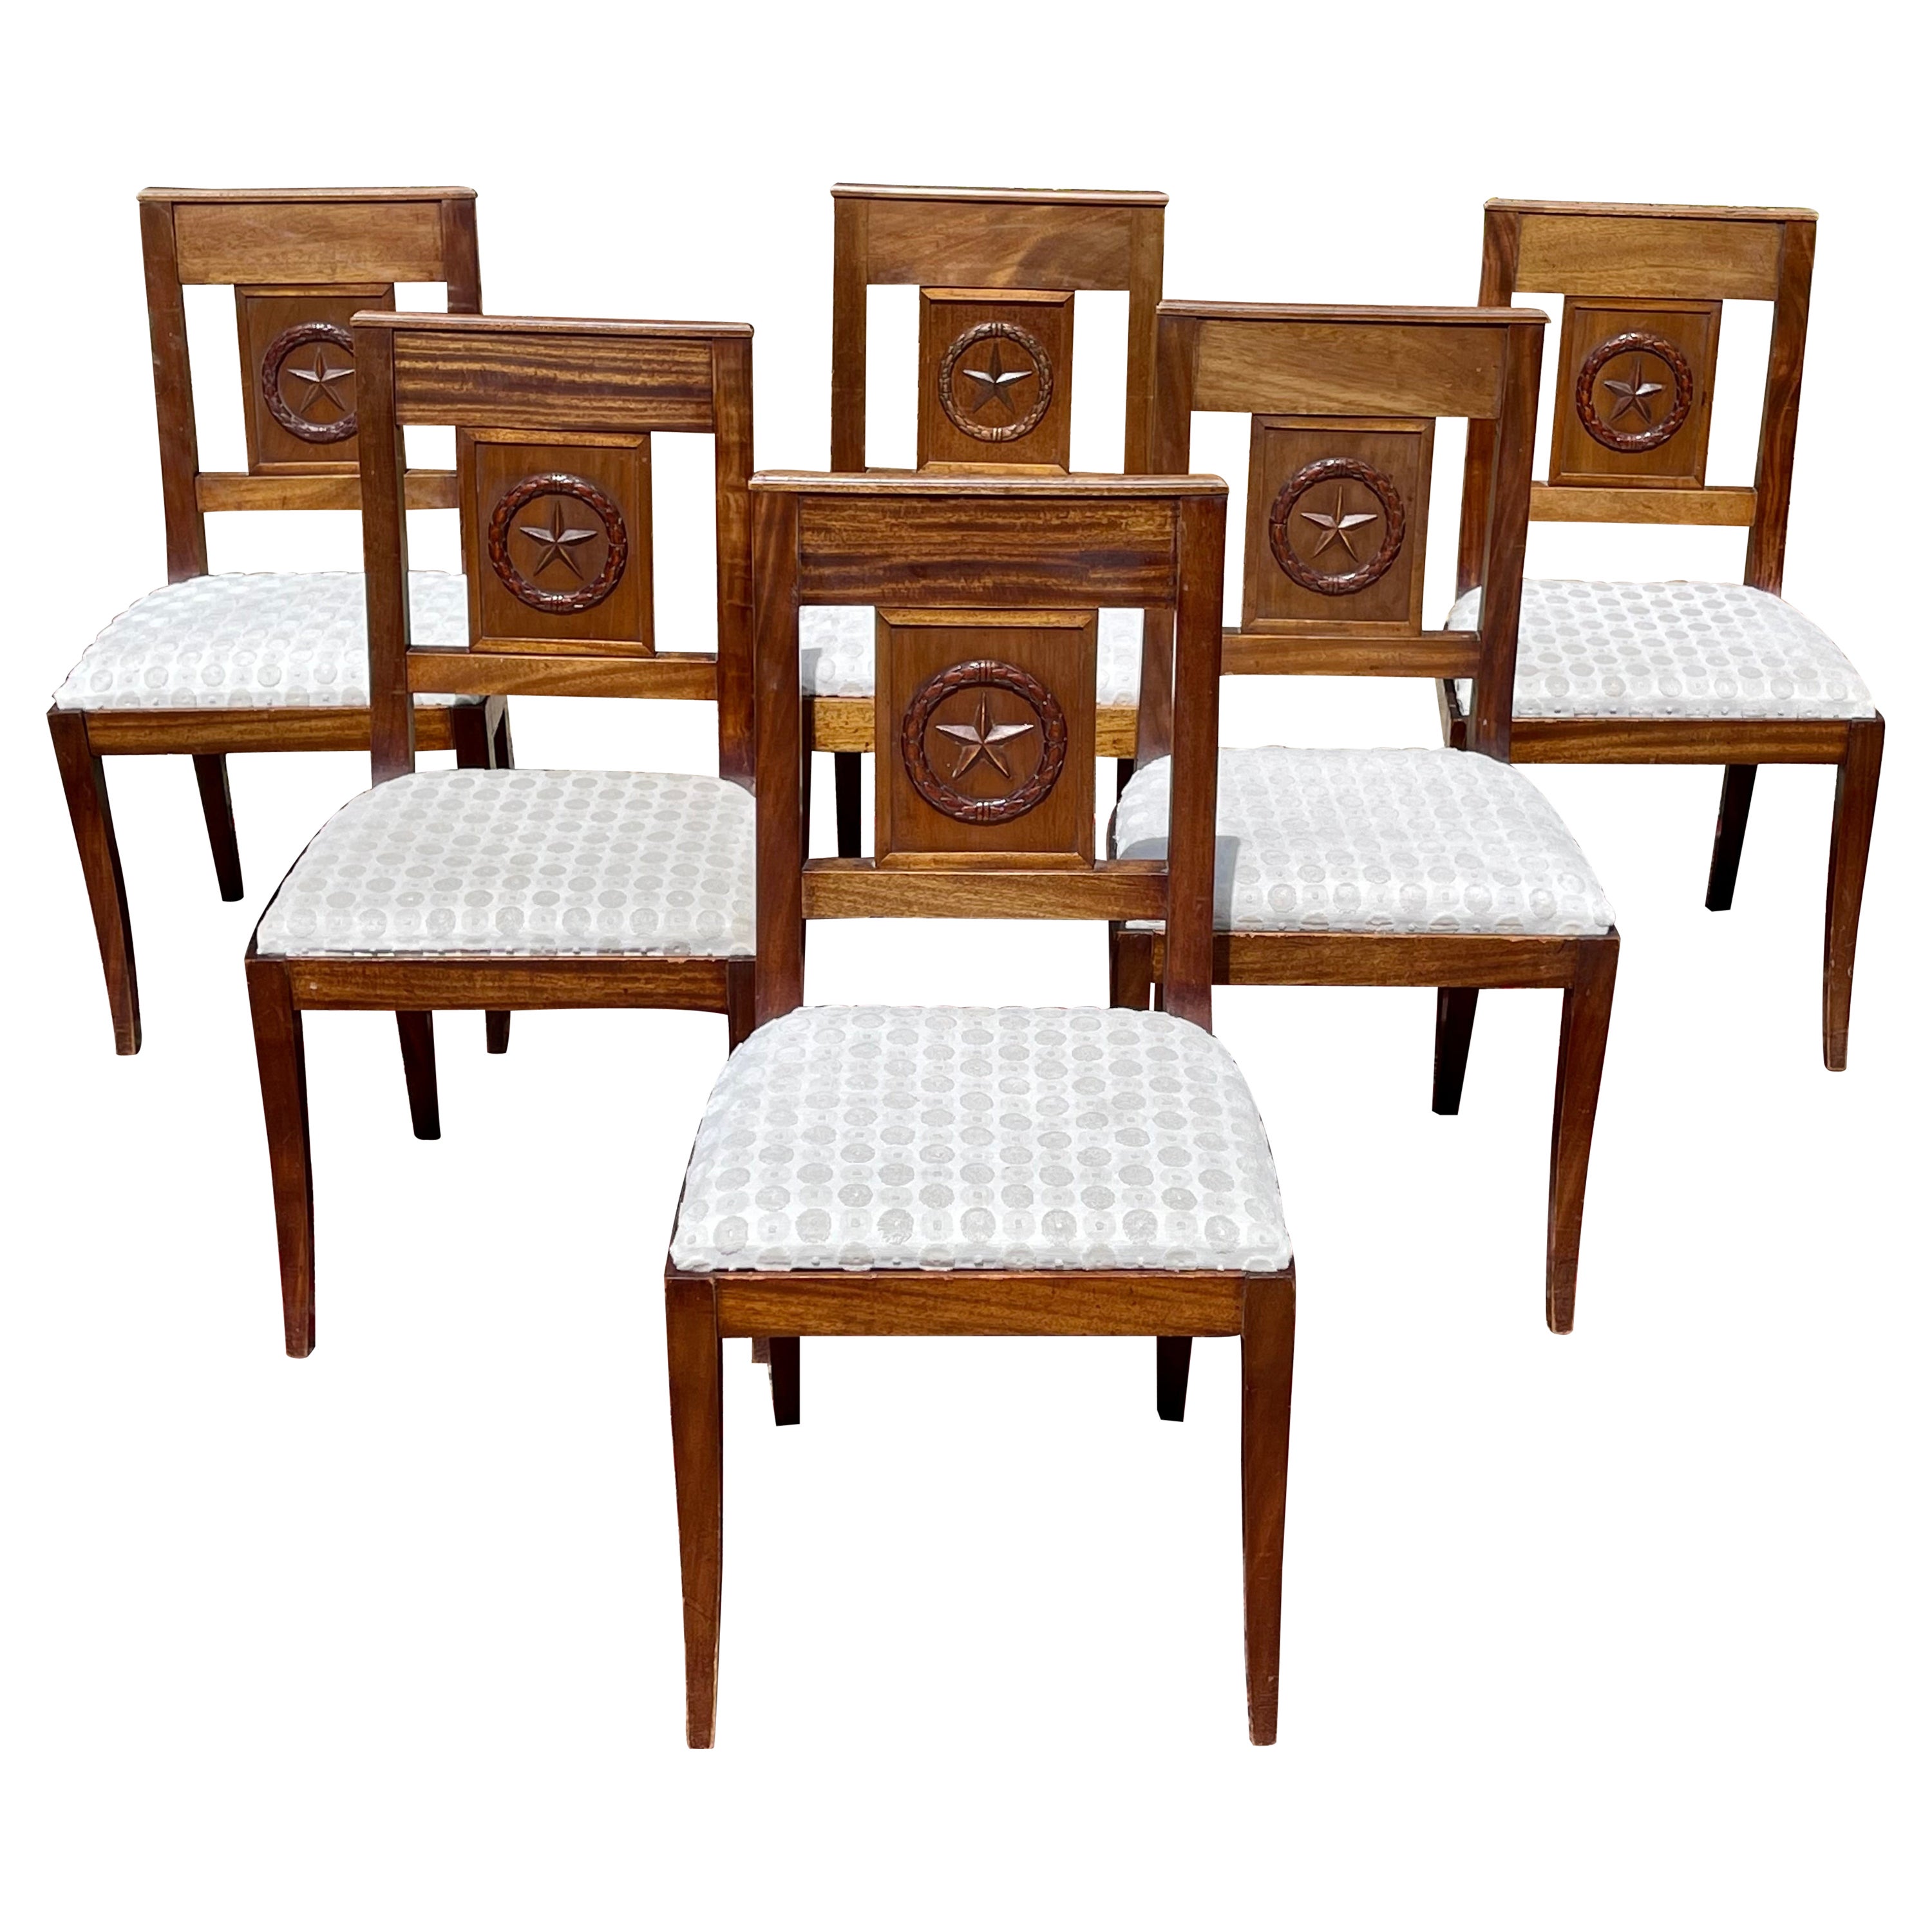 19th Century, 6 Mahogany Chairs, Directoire Style For Sale